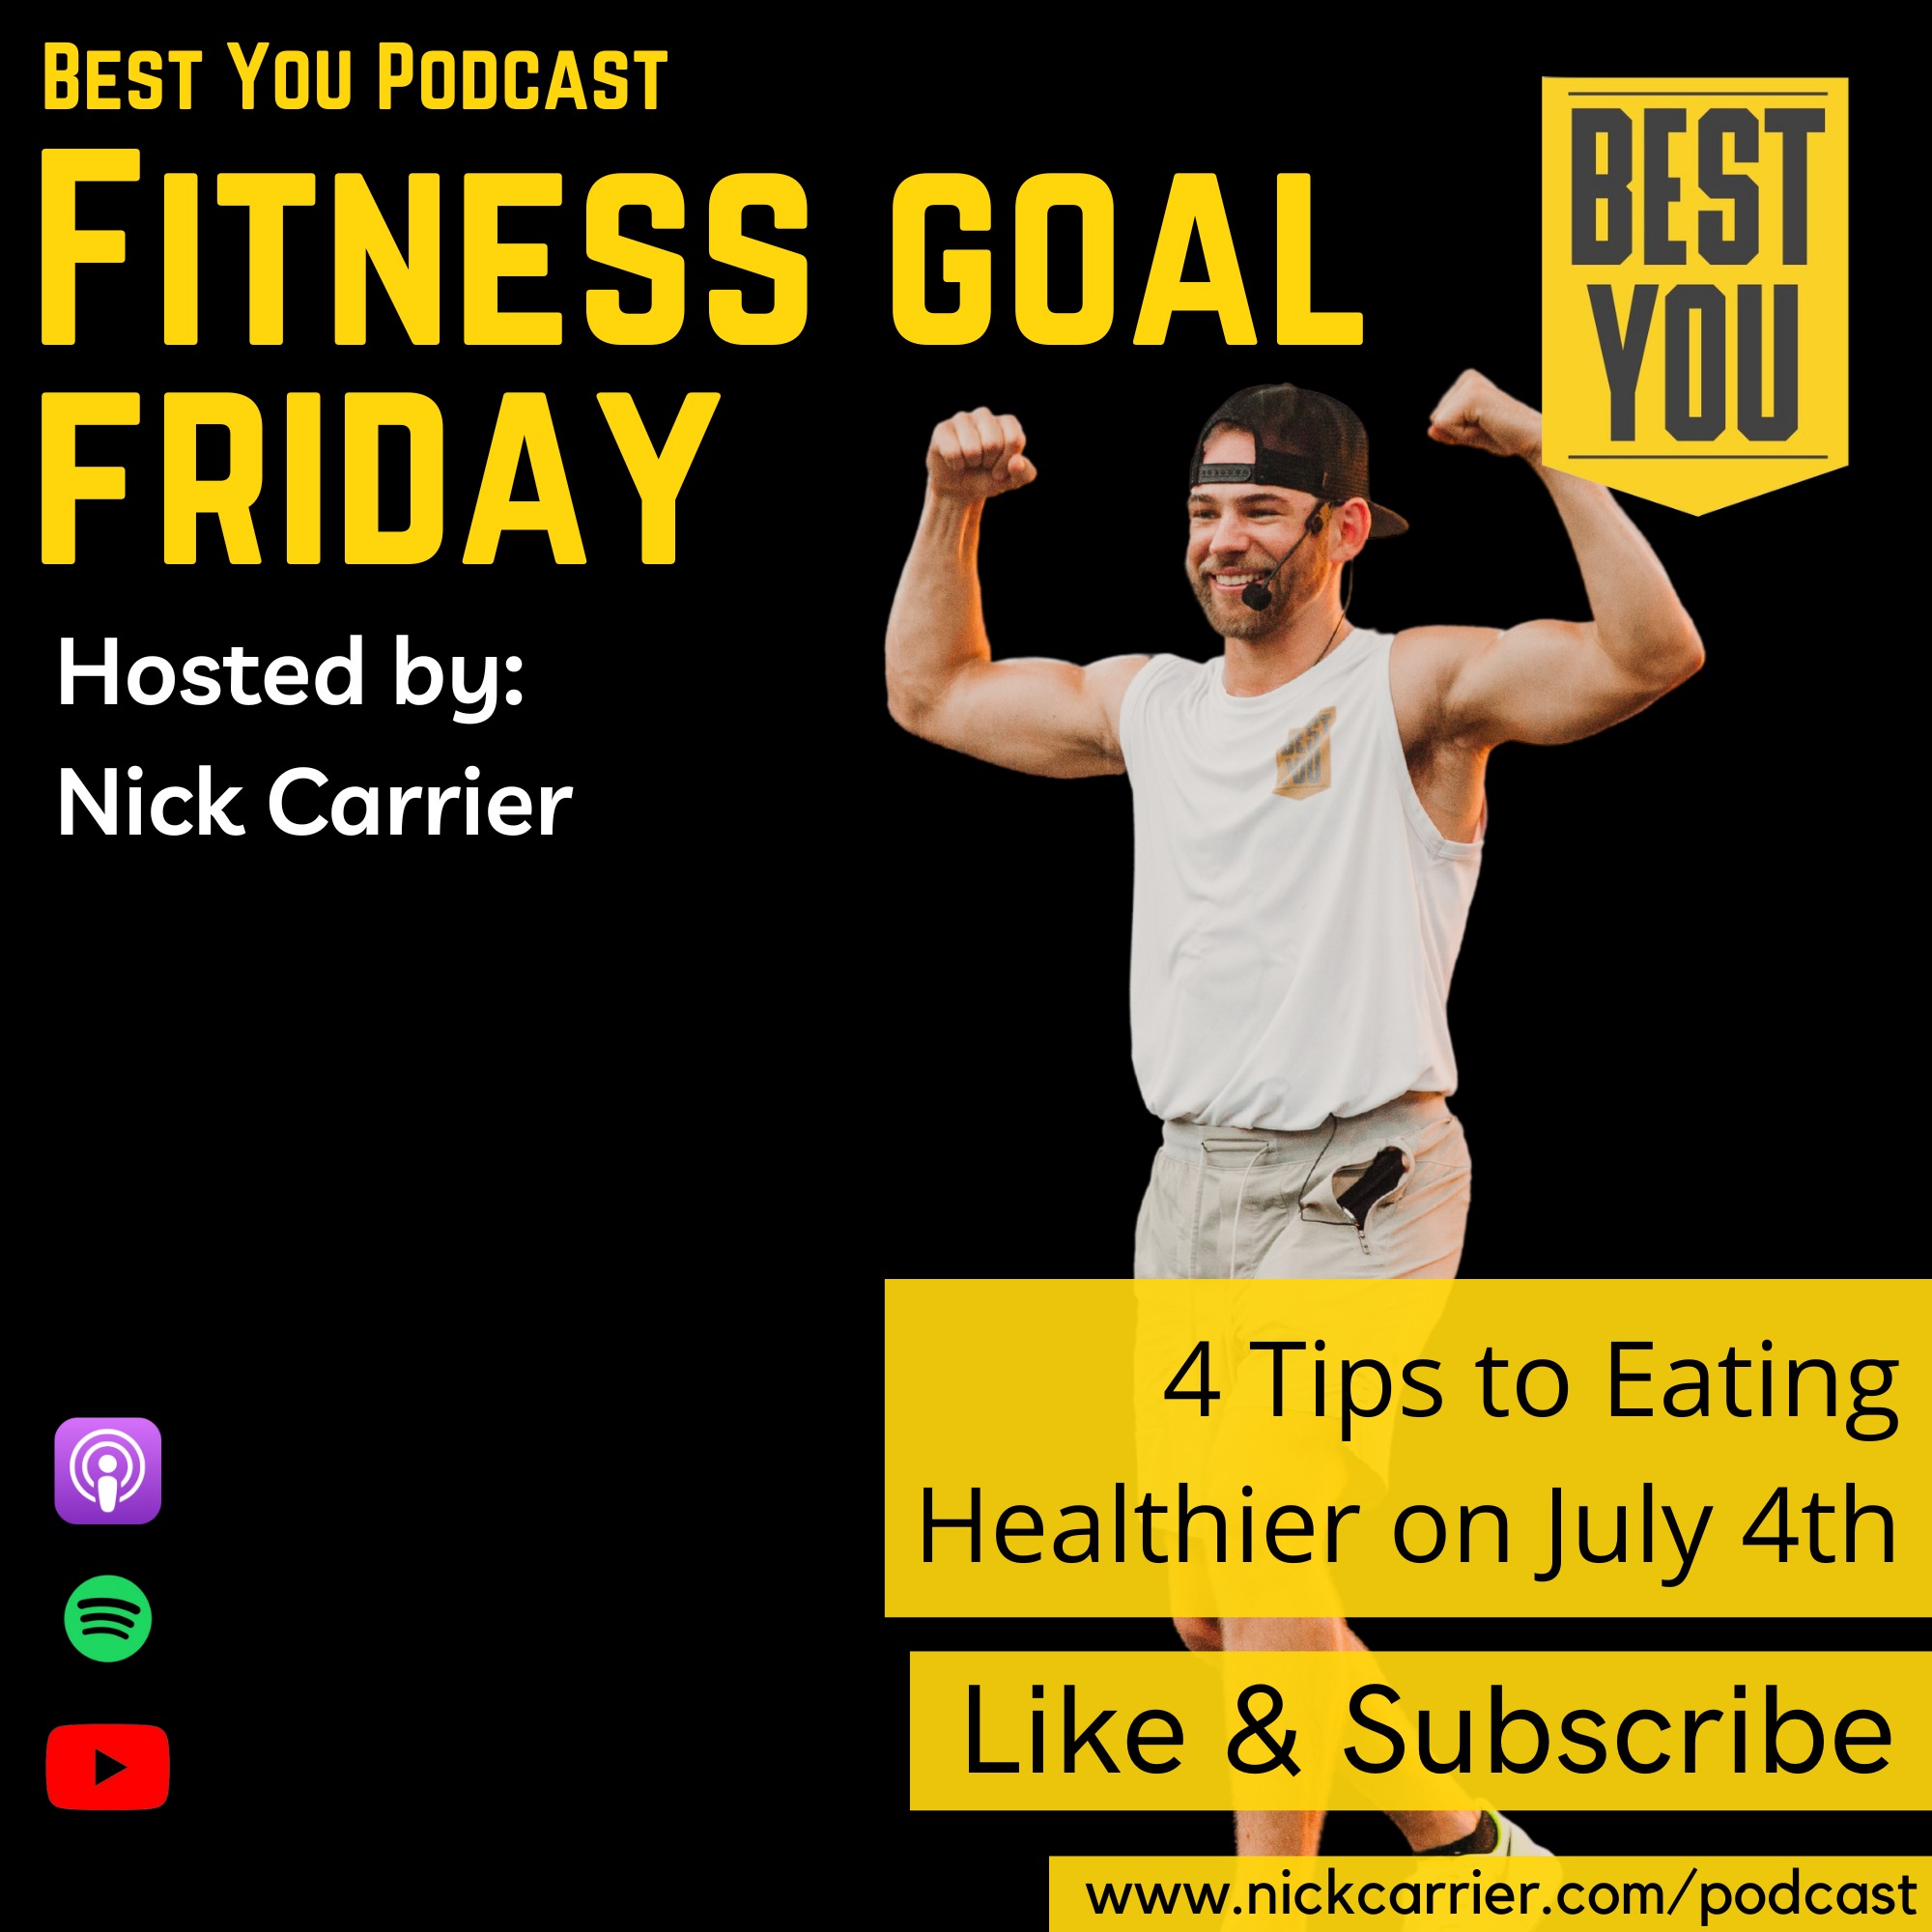 Fitness Goal Friday - 4 Tips to Eating Healthier on July 4th